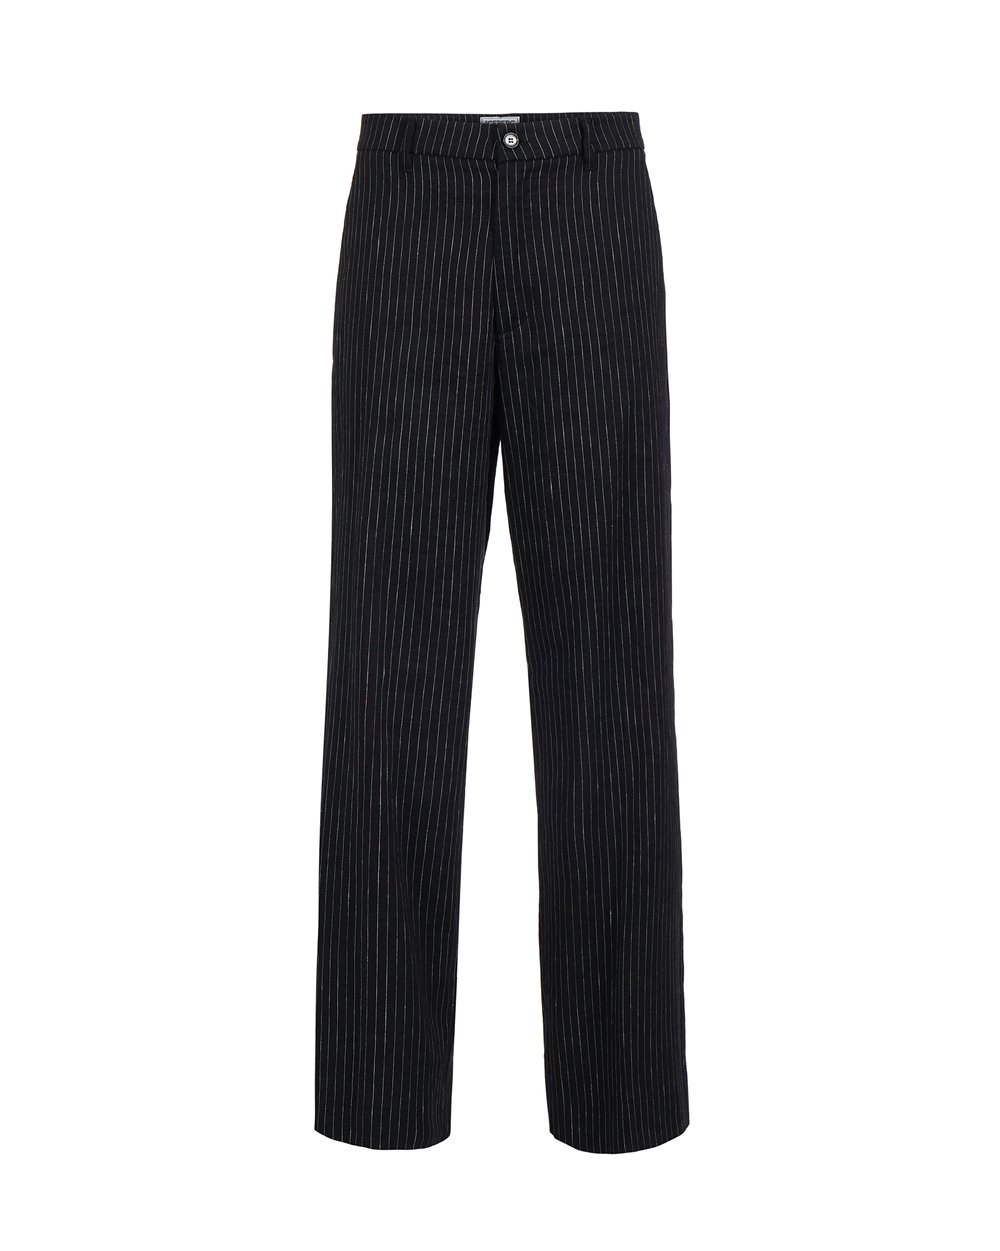 Pinstripe chinos pants - Clothing | Iceberg - Official Website